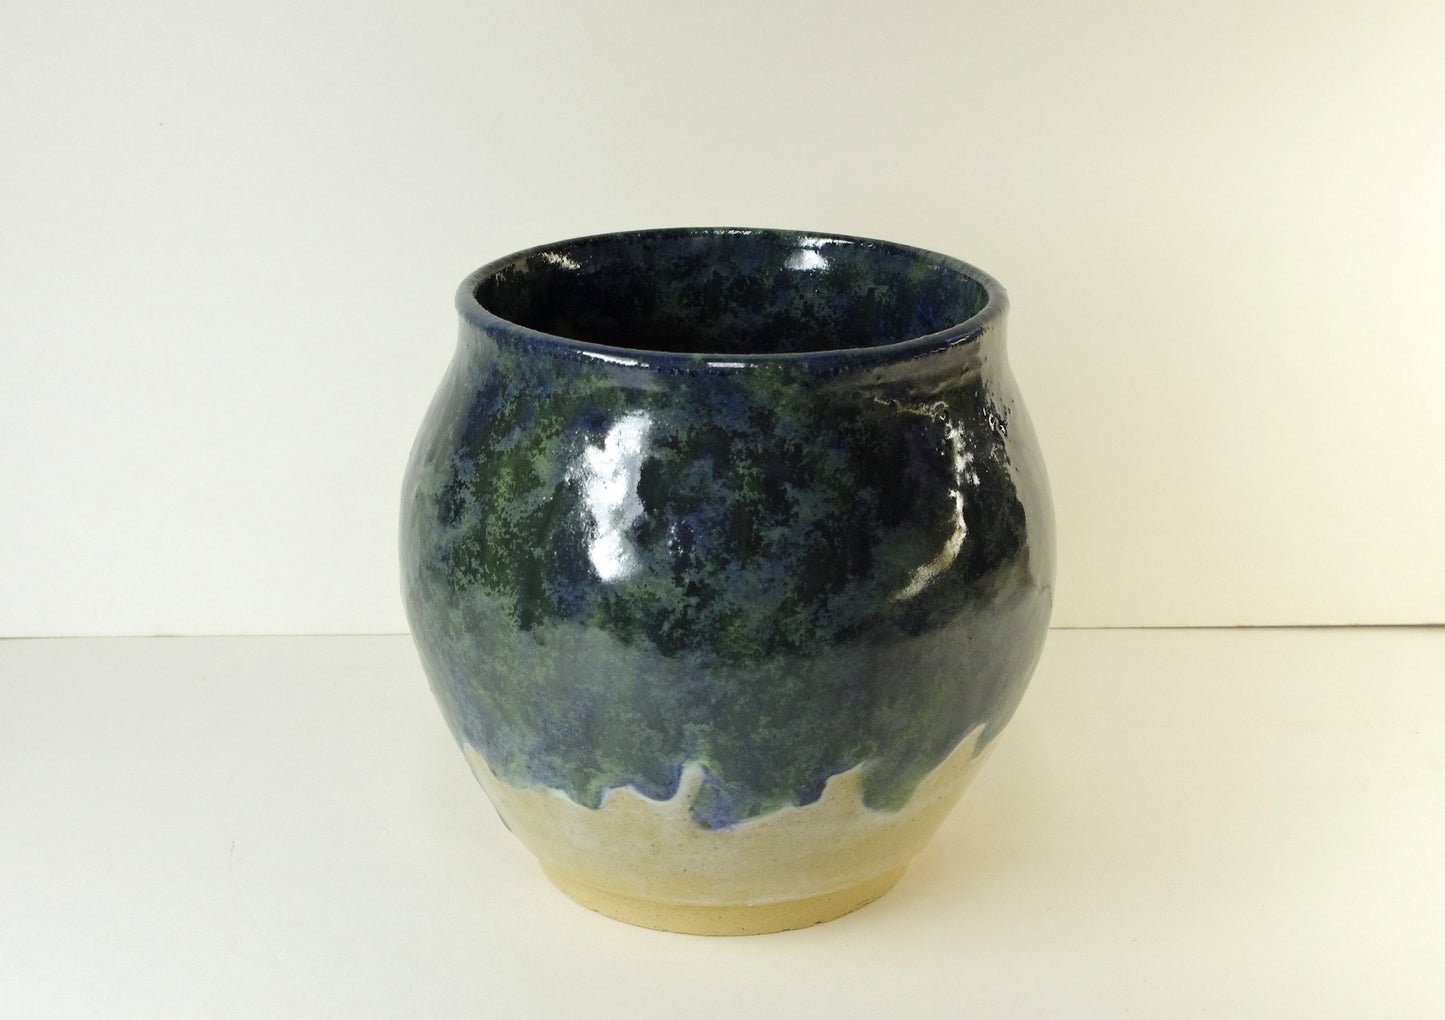 2111, Hand Thrown Stoneware Vase, 4 5/8 (at rim) x 5 3/4 x 5 1/2 inches tall, blues greens and beige